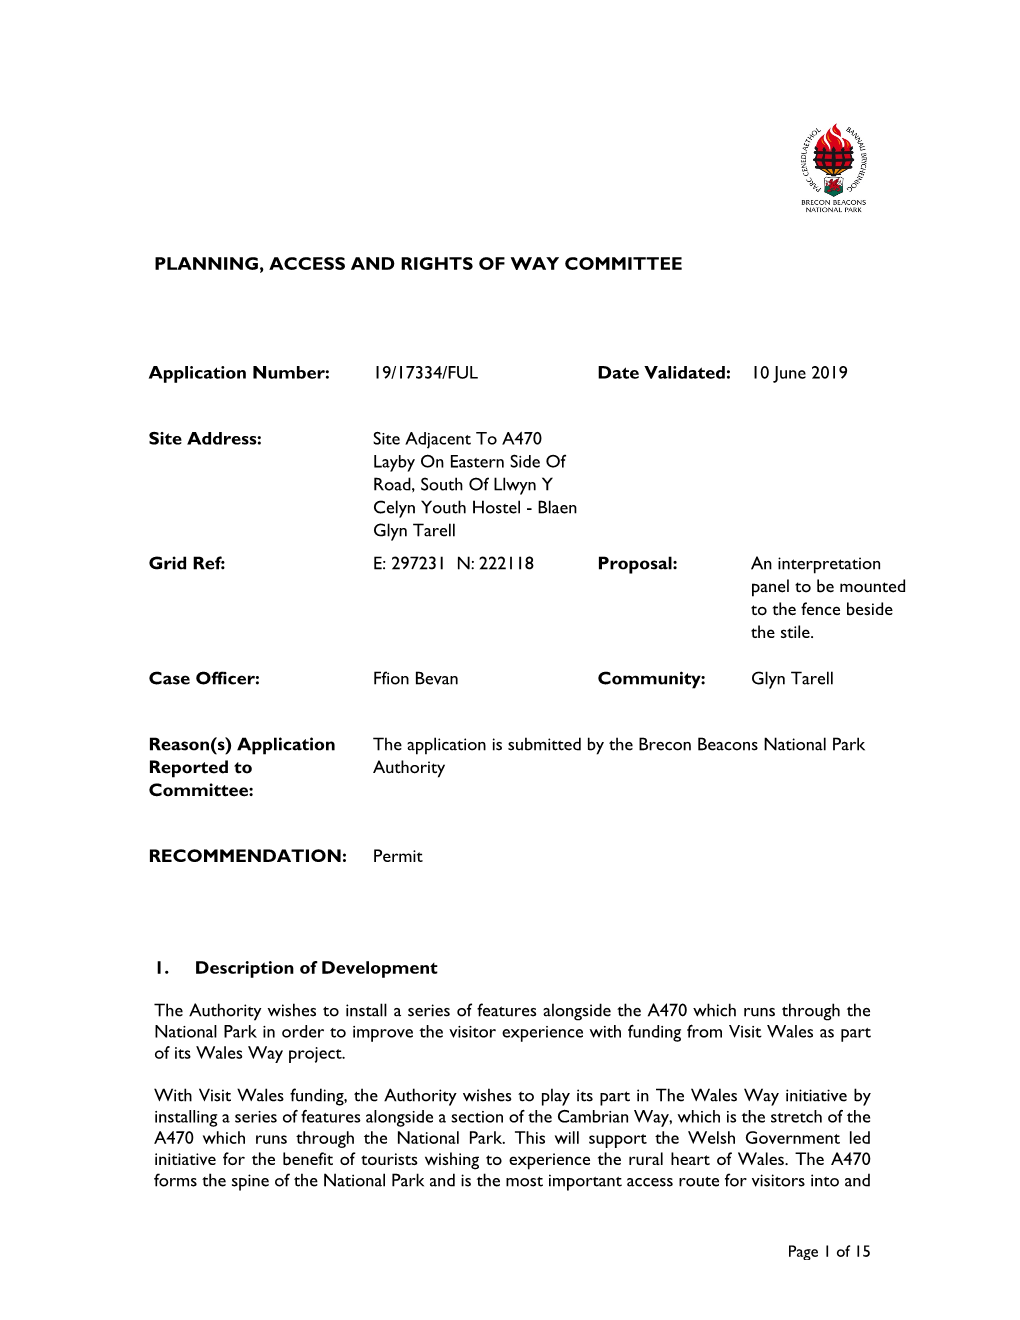 PLANNING, ACCESS and RIGHTS of WAY COMMITTEE Application Number: 19/17334/FUL Date Validated: 10 June 2019 Site Address: Site Ad